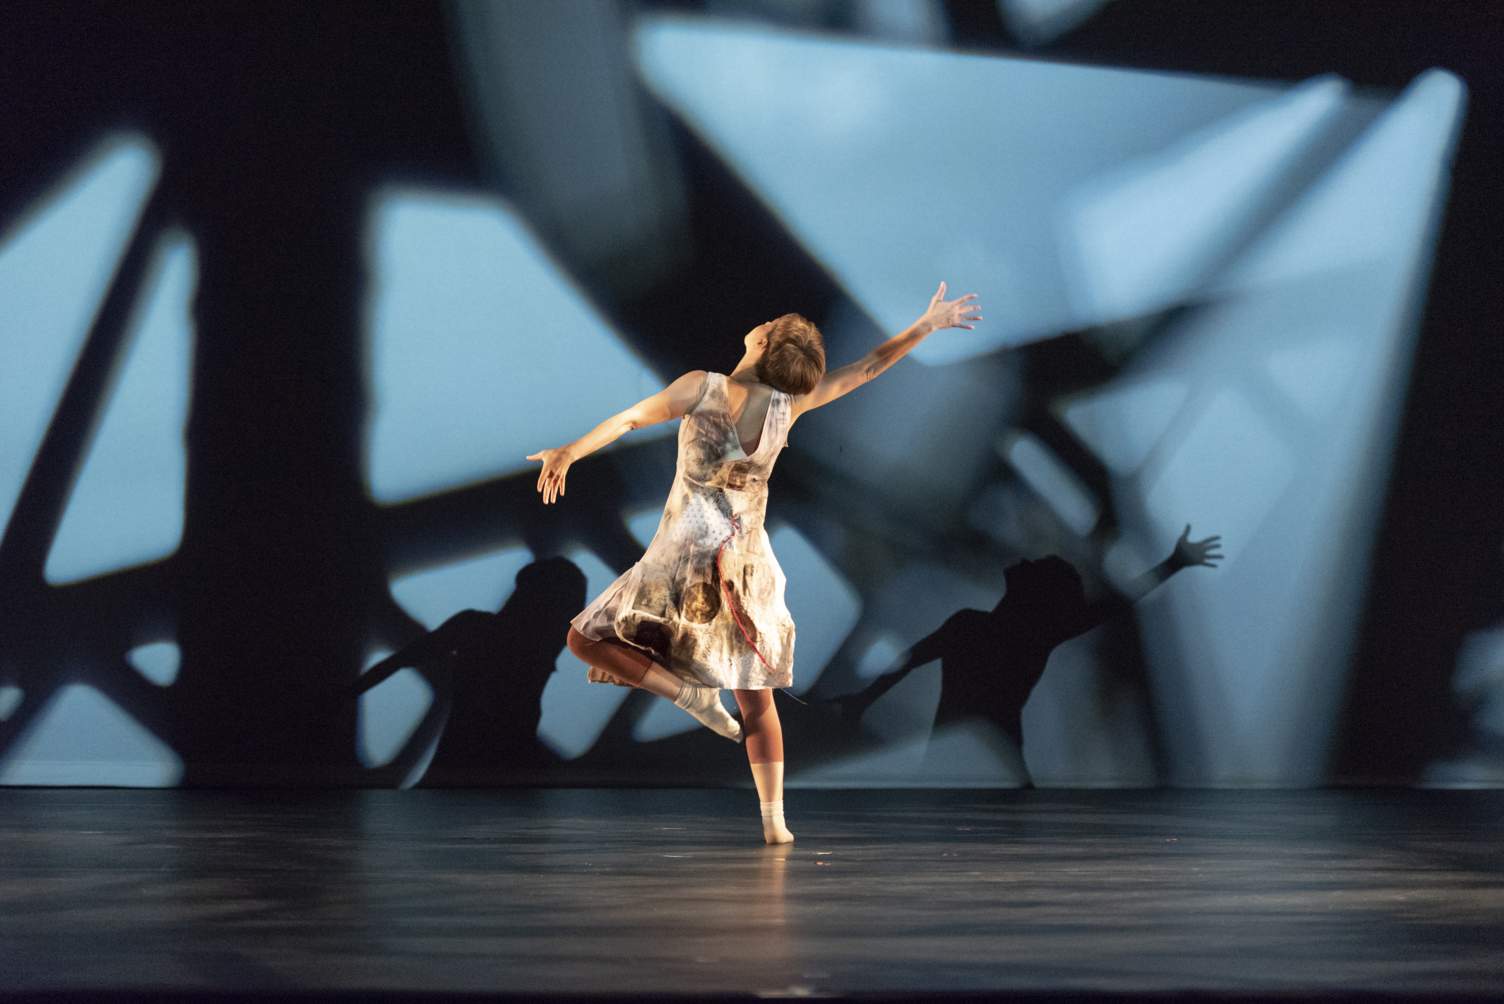 Dancer on stage at Texas State University with shadows behind them